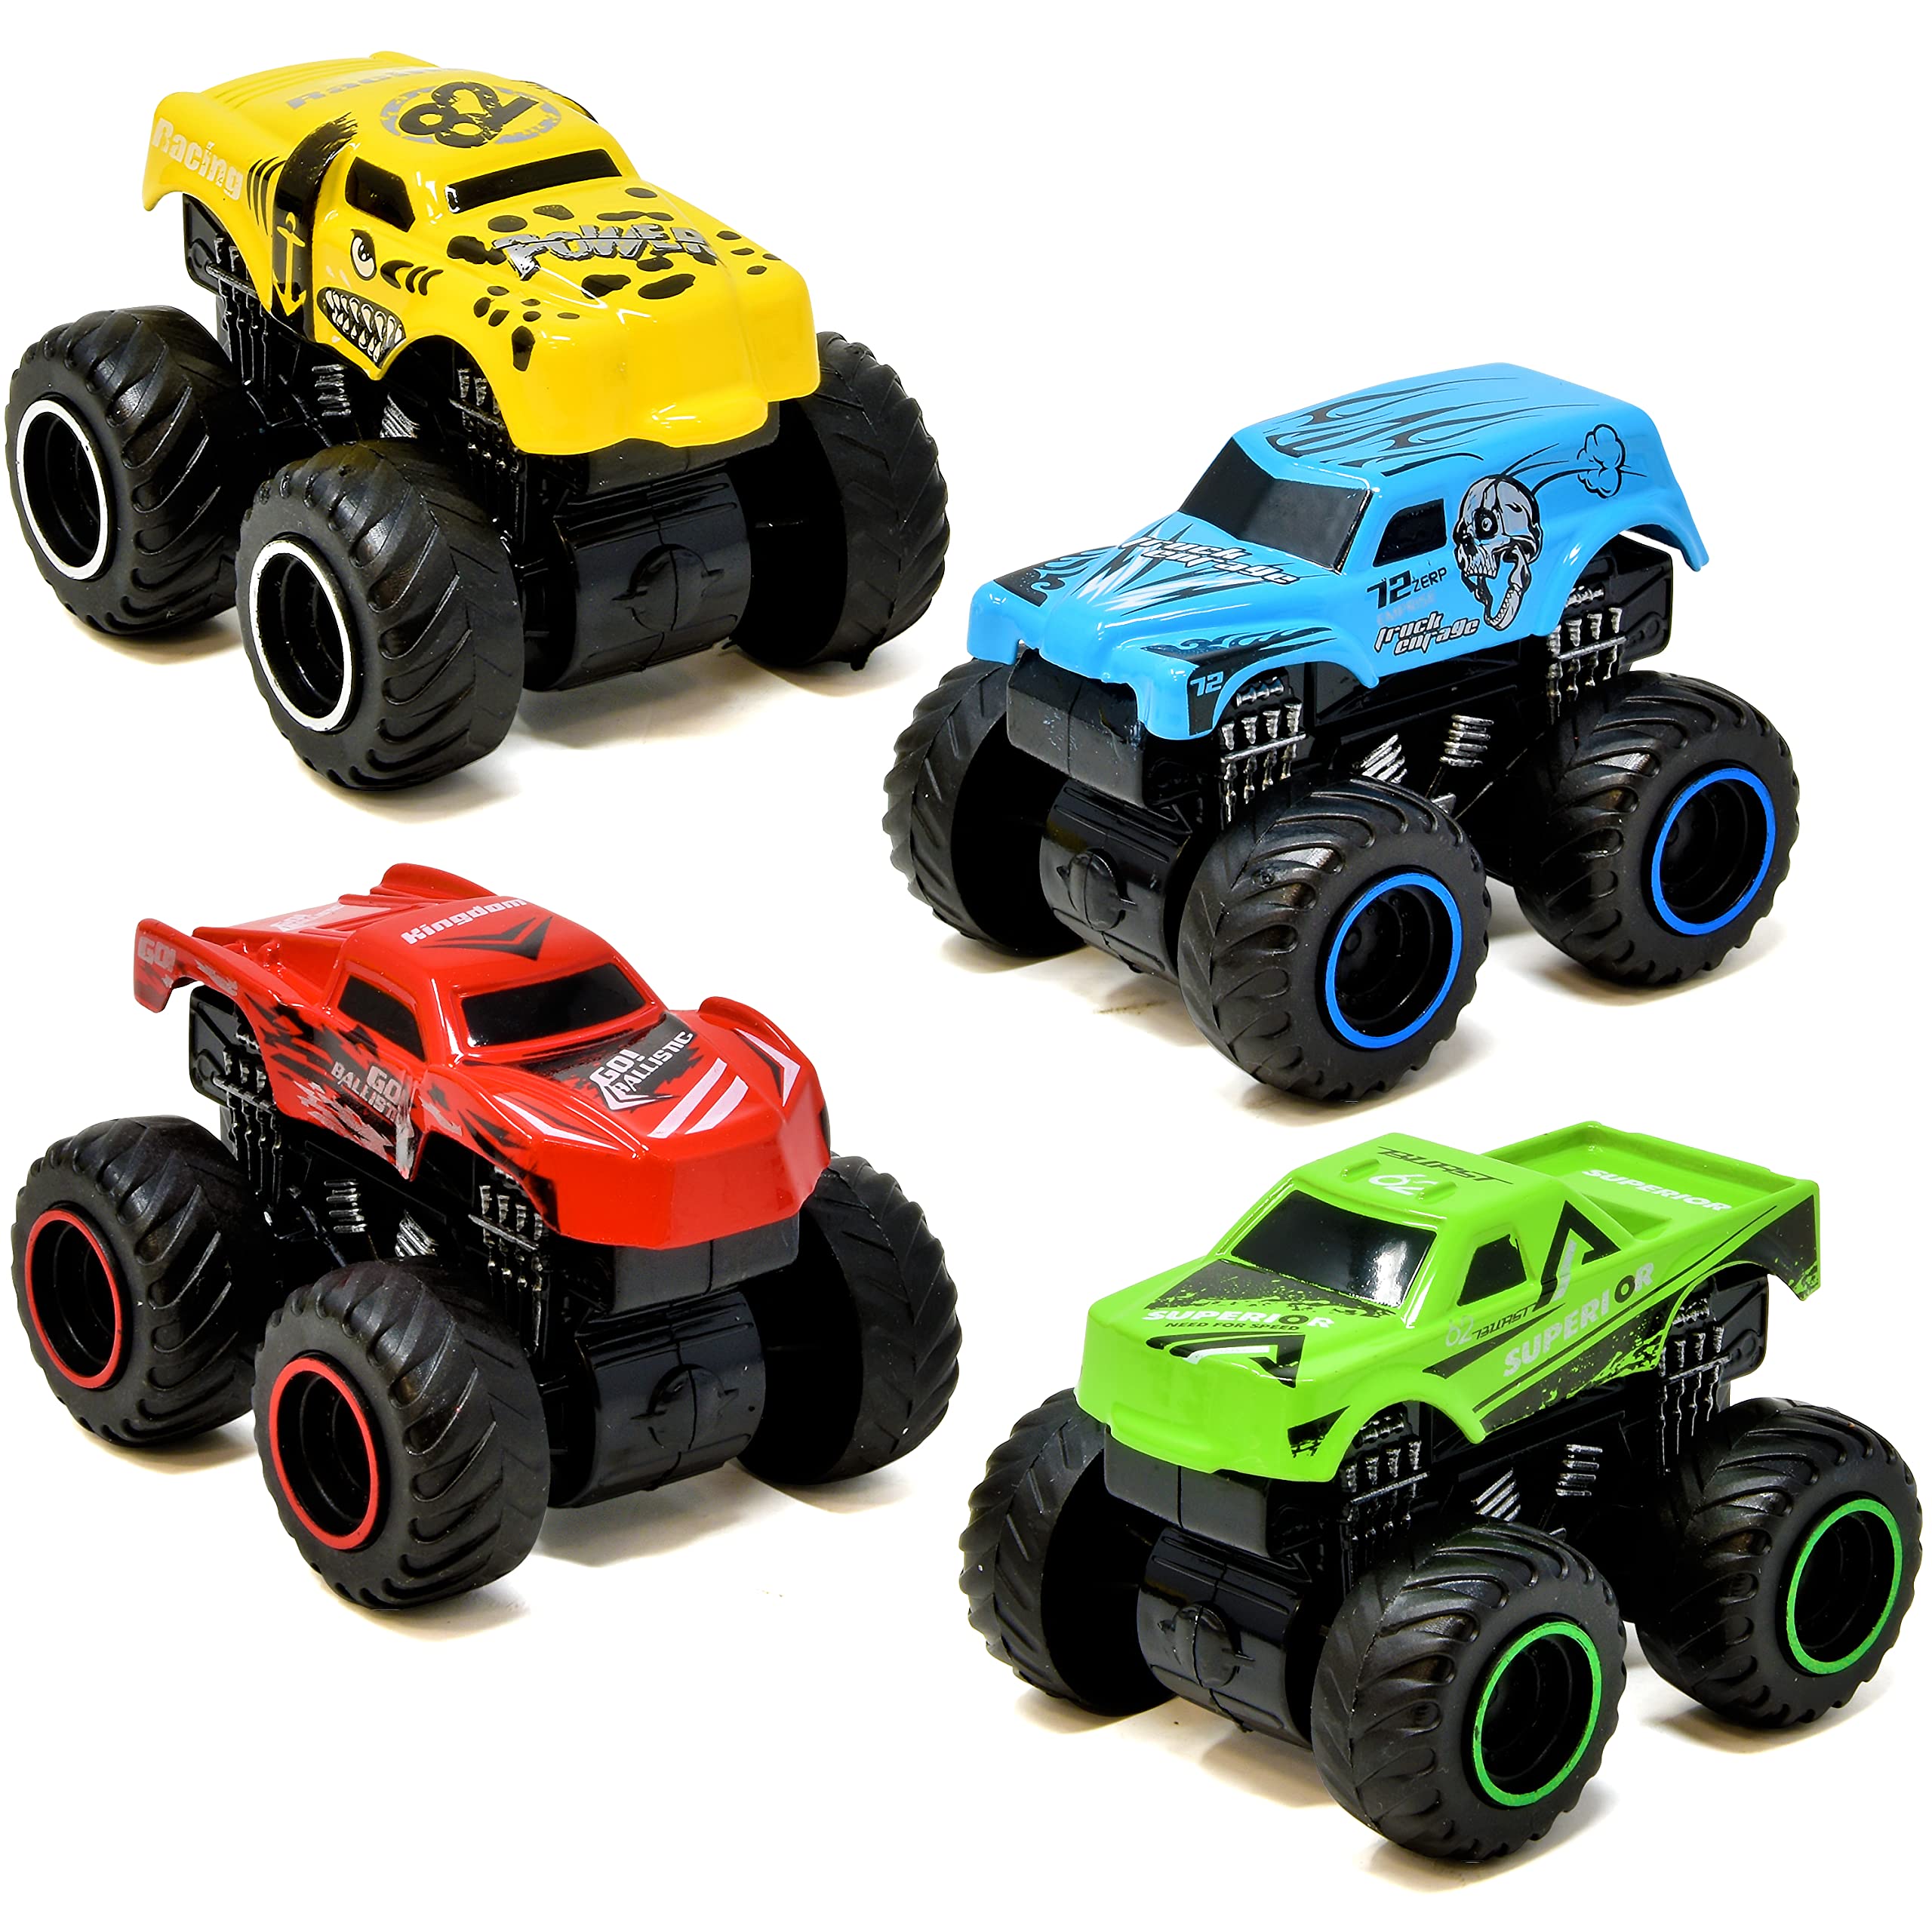 Number 1 in Service Monster Trucks for Boys Inertia Powered 4 Wheels Diecast Mini Vehicle Set Push and go Small Toy cars 4 Pack for Toddlers and Kid